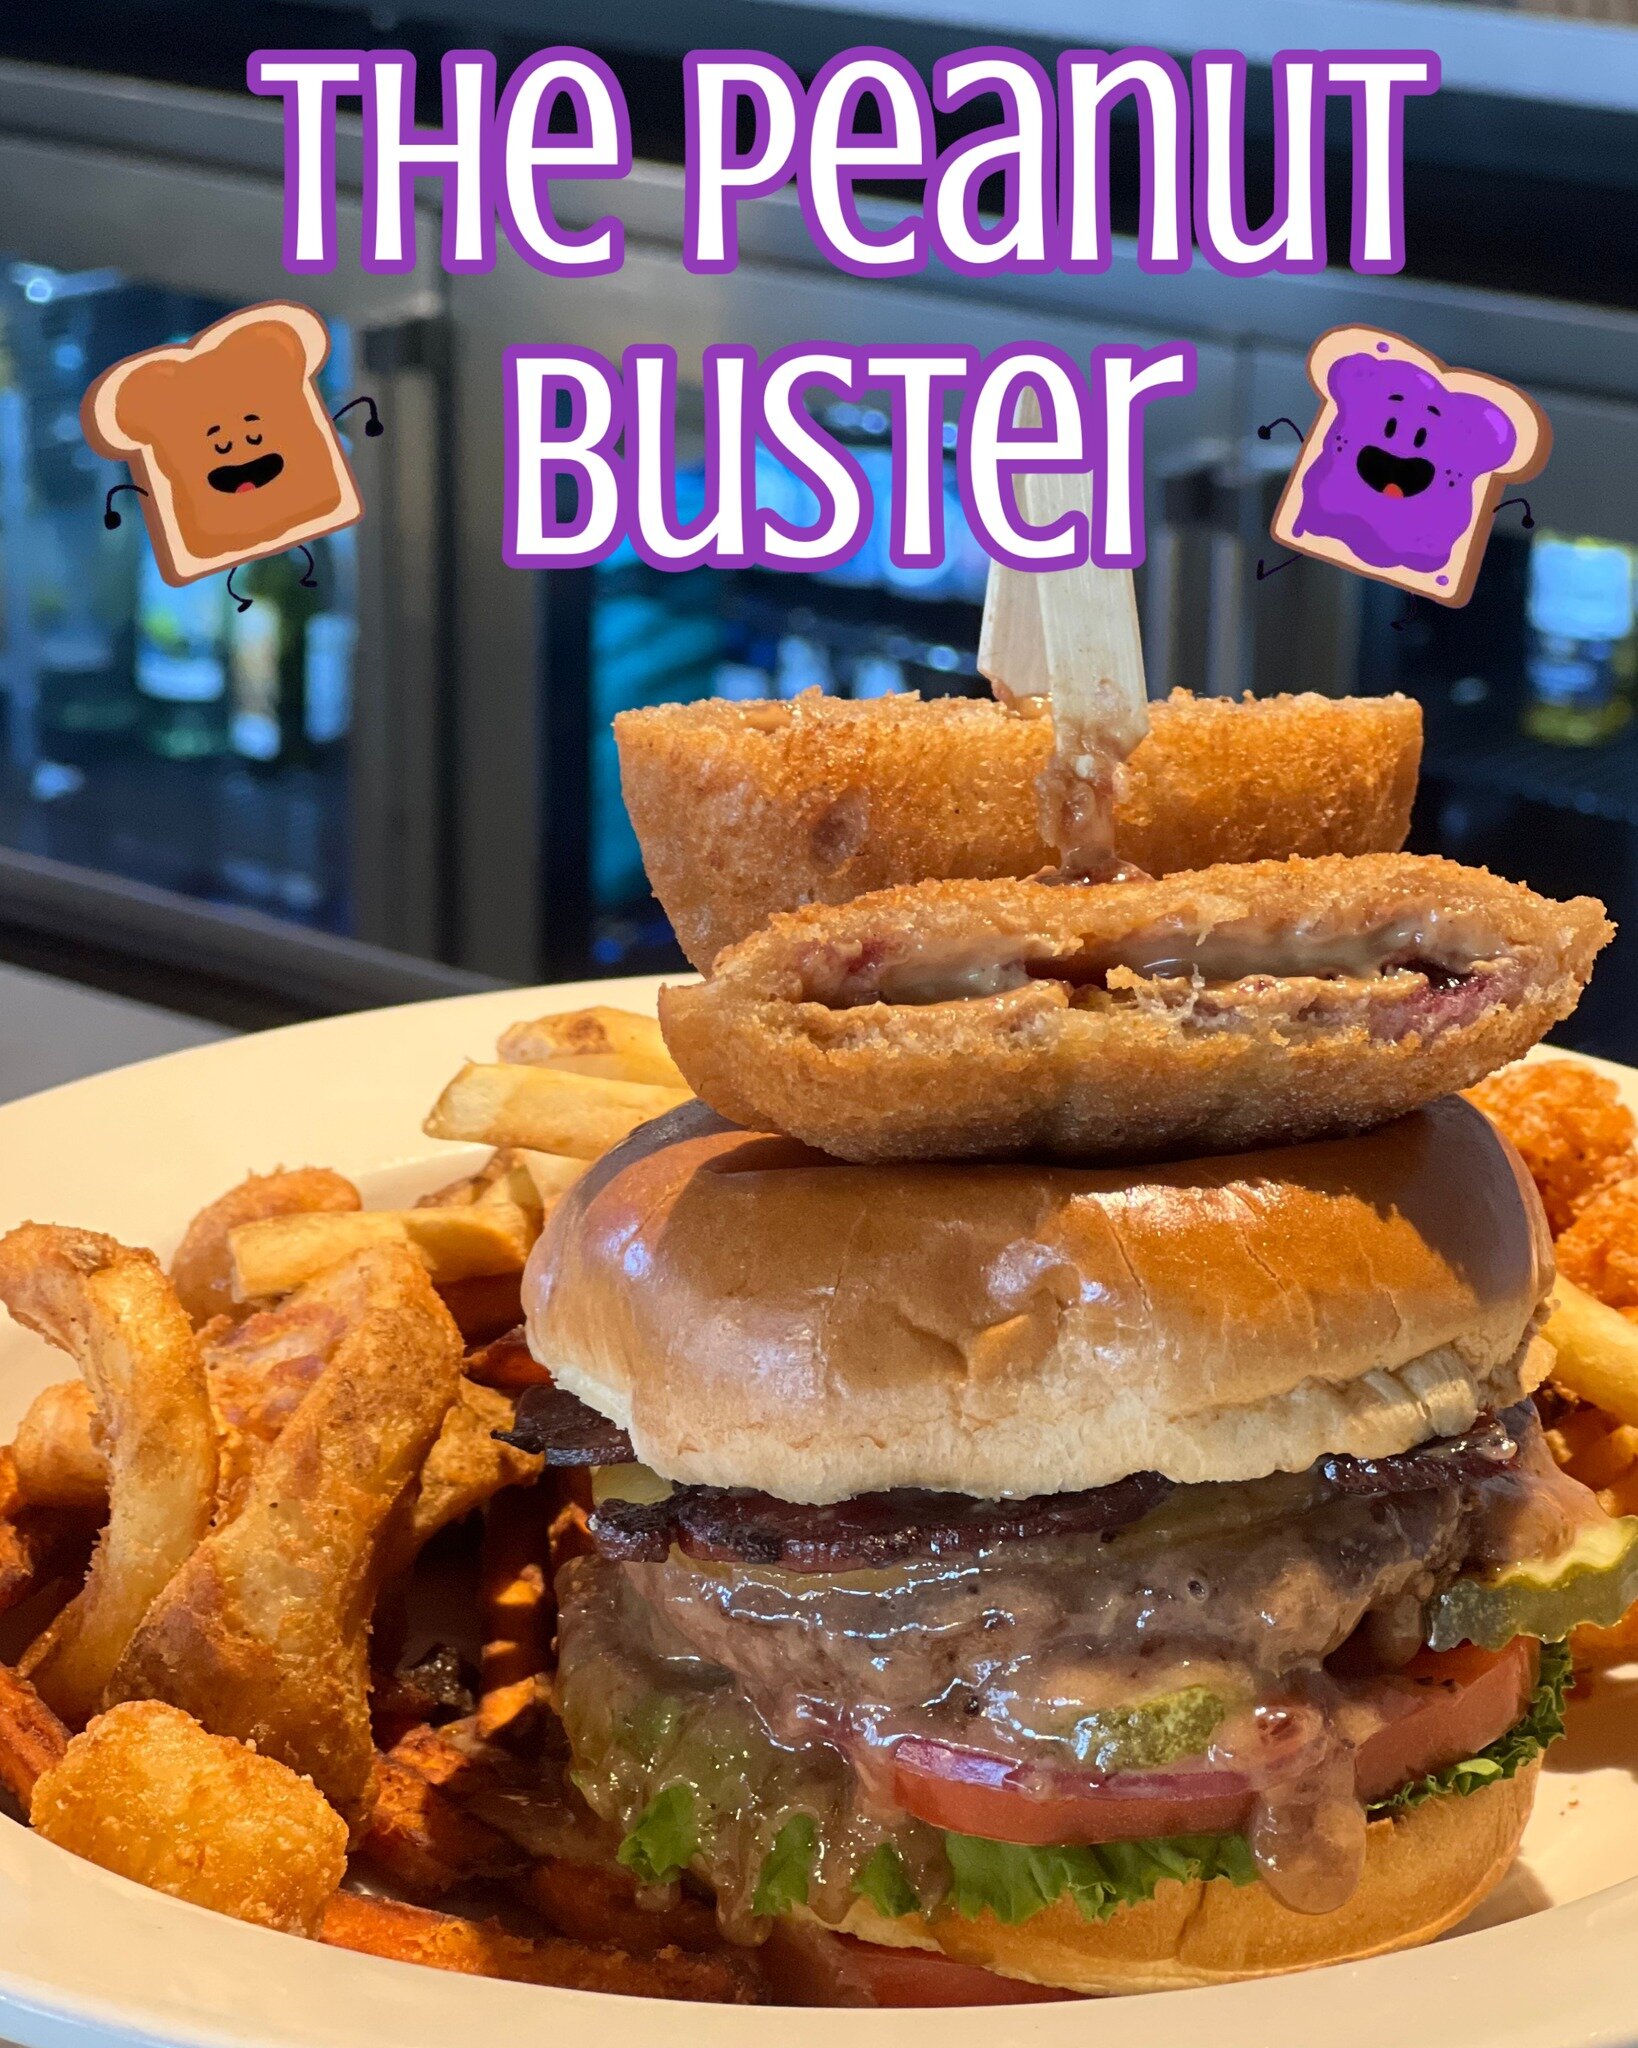 Introducing &quot;The Peanut Buster&quot; burger! 🥜🍇

A soft and buttery brioche bun, generously spread with creamy peanut butter and sweet jelly, creating a delectable base for what's to come. Layered on top are fresh lettuce, juicy tomato slices,